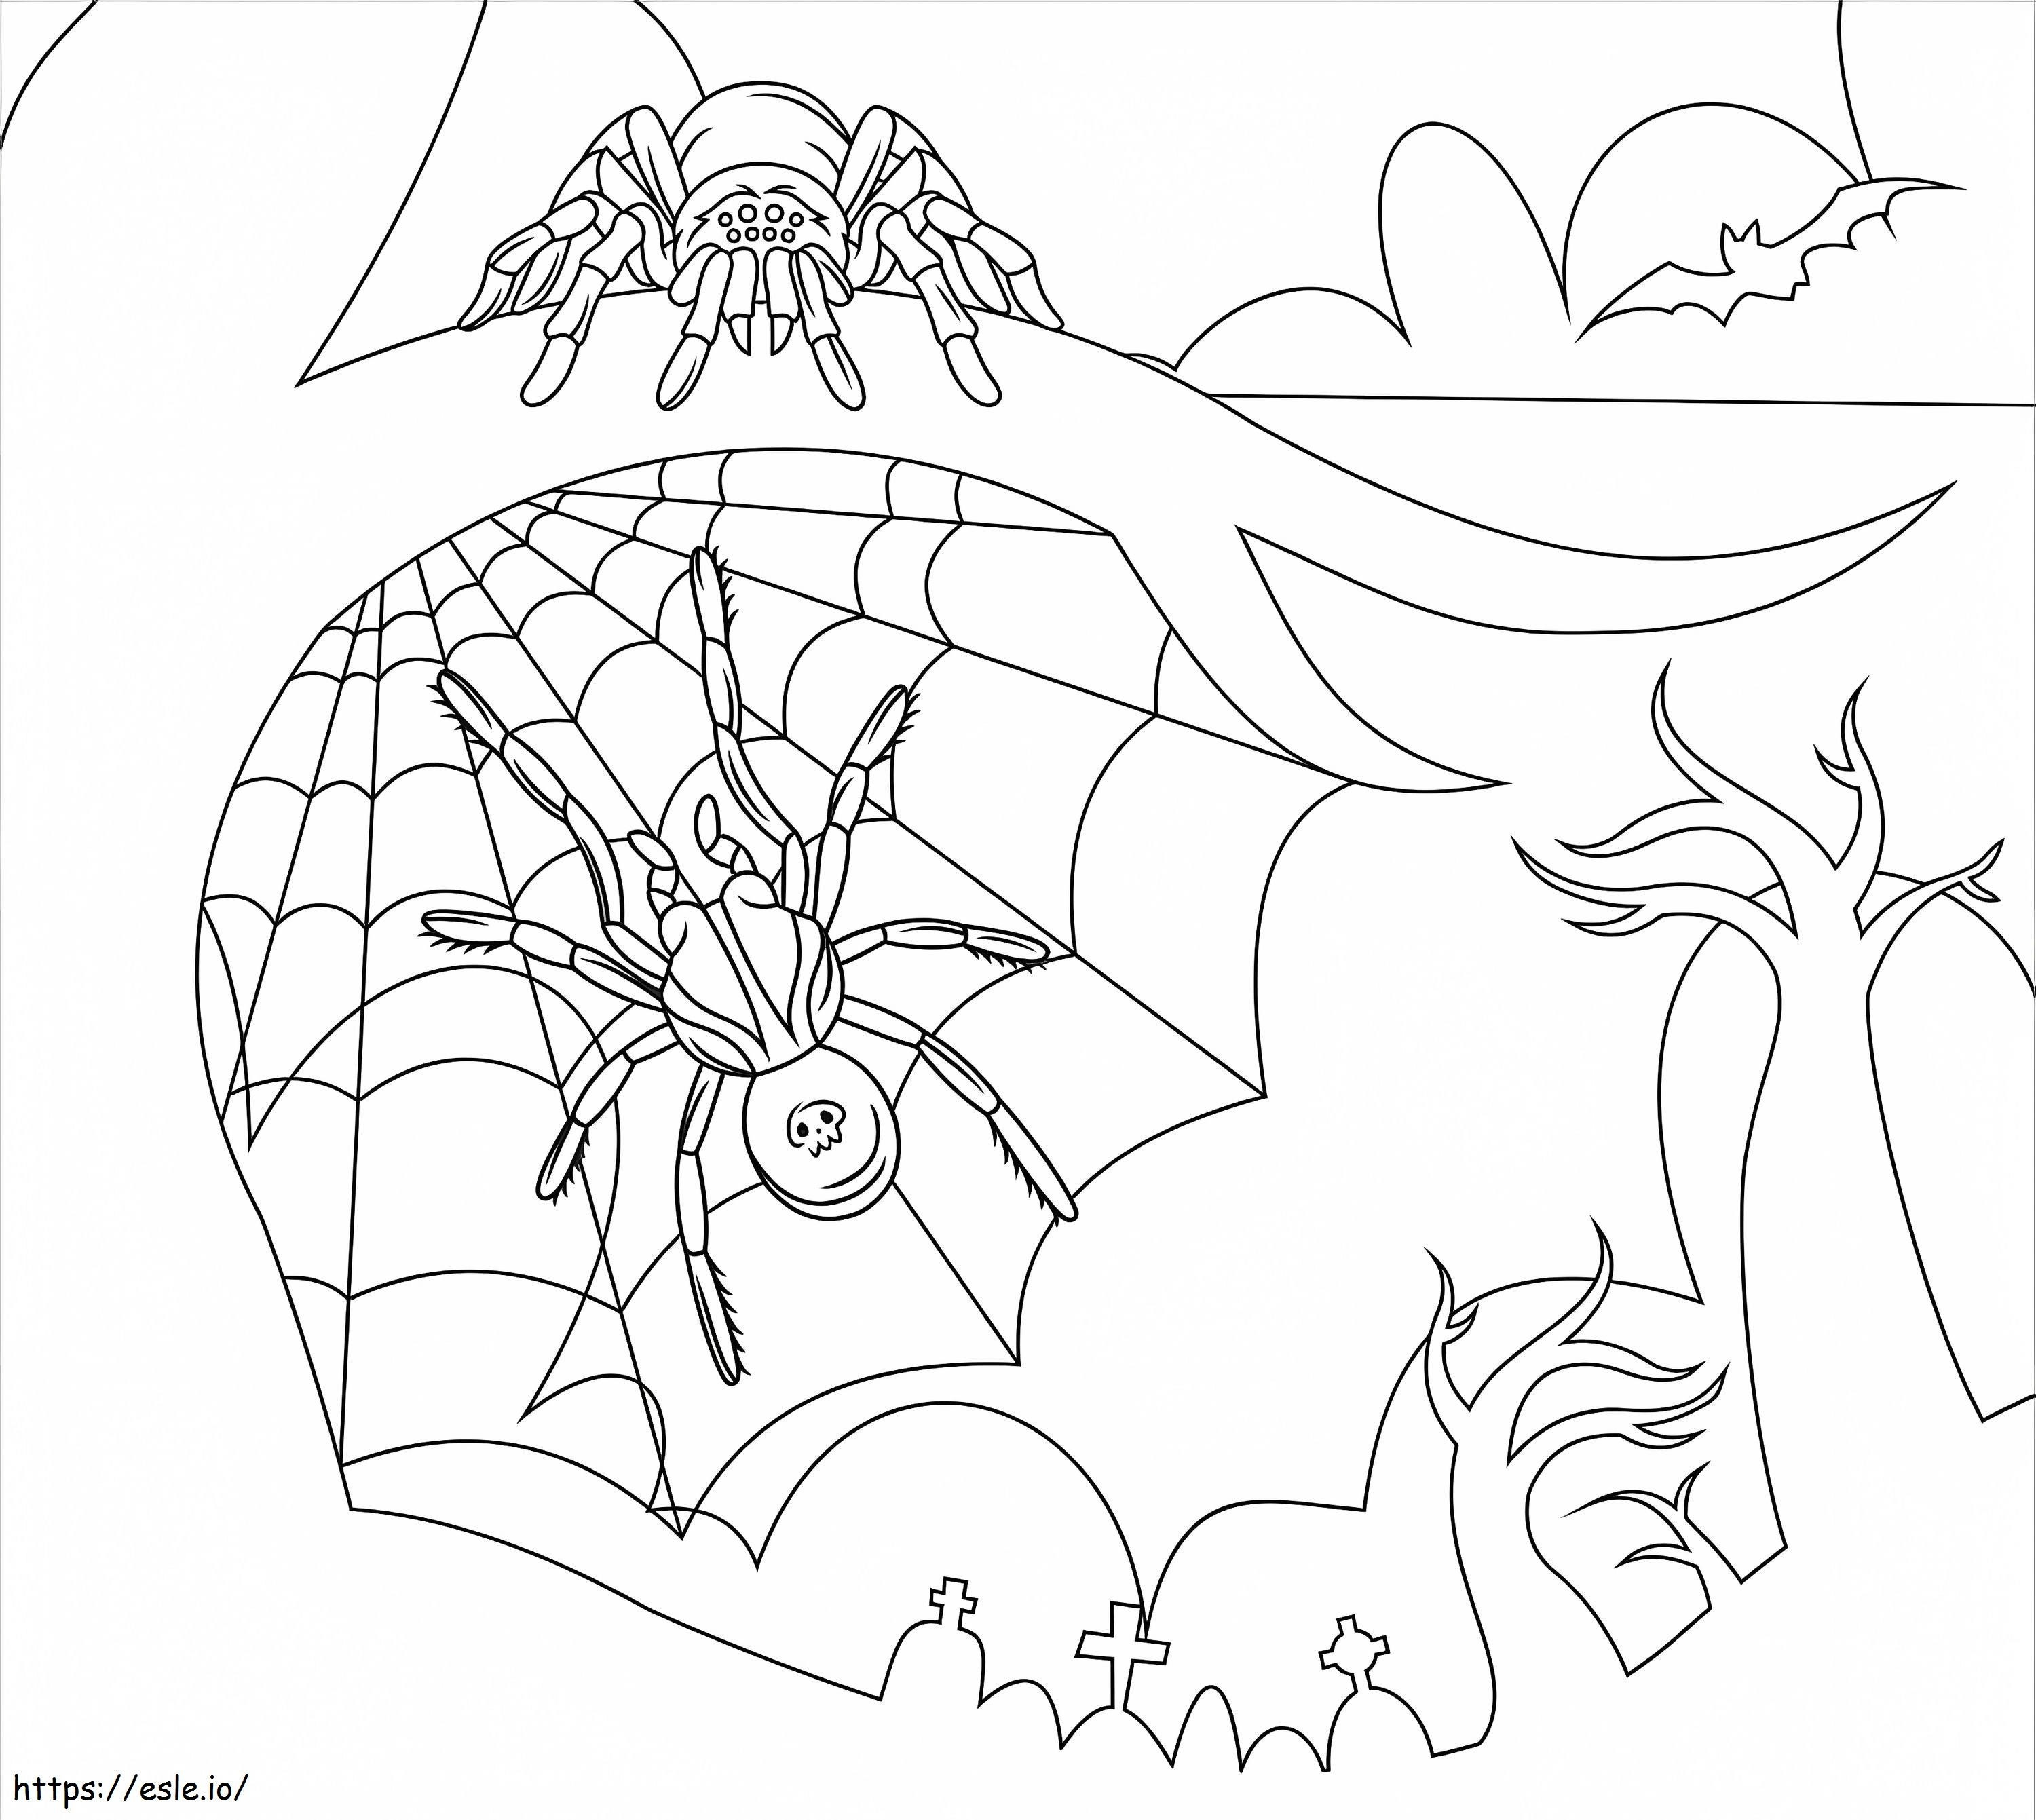 Two Spiders coloring page